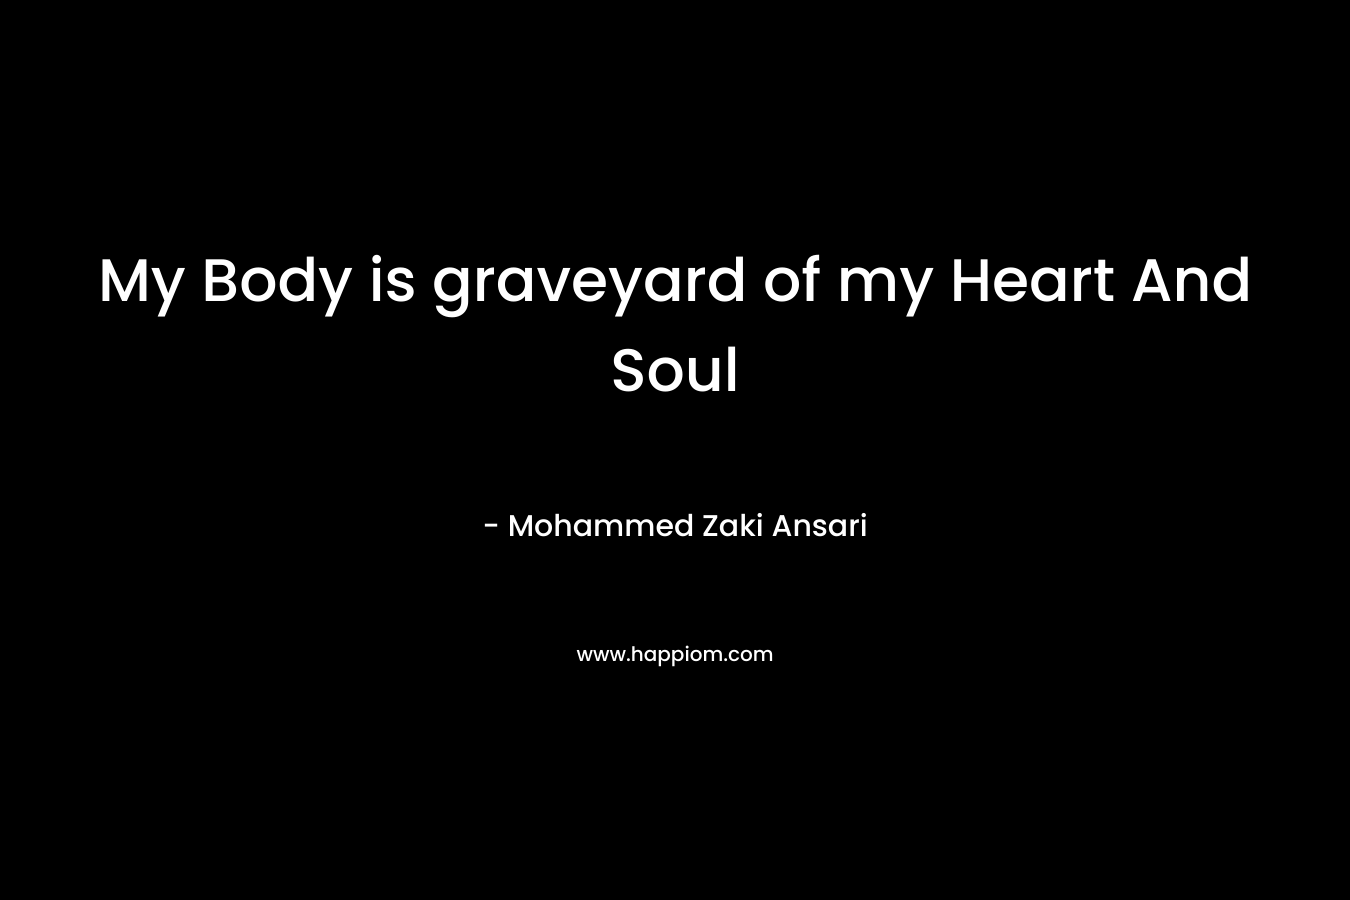 My Body is graveyard of my Heart And Soul